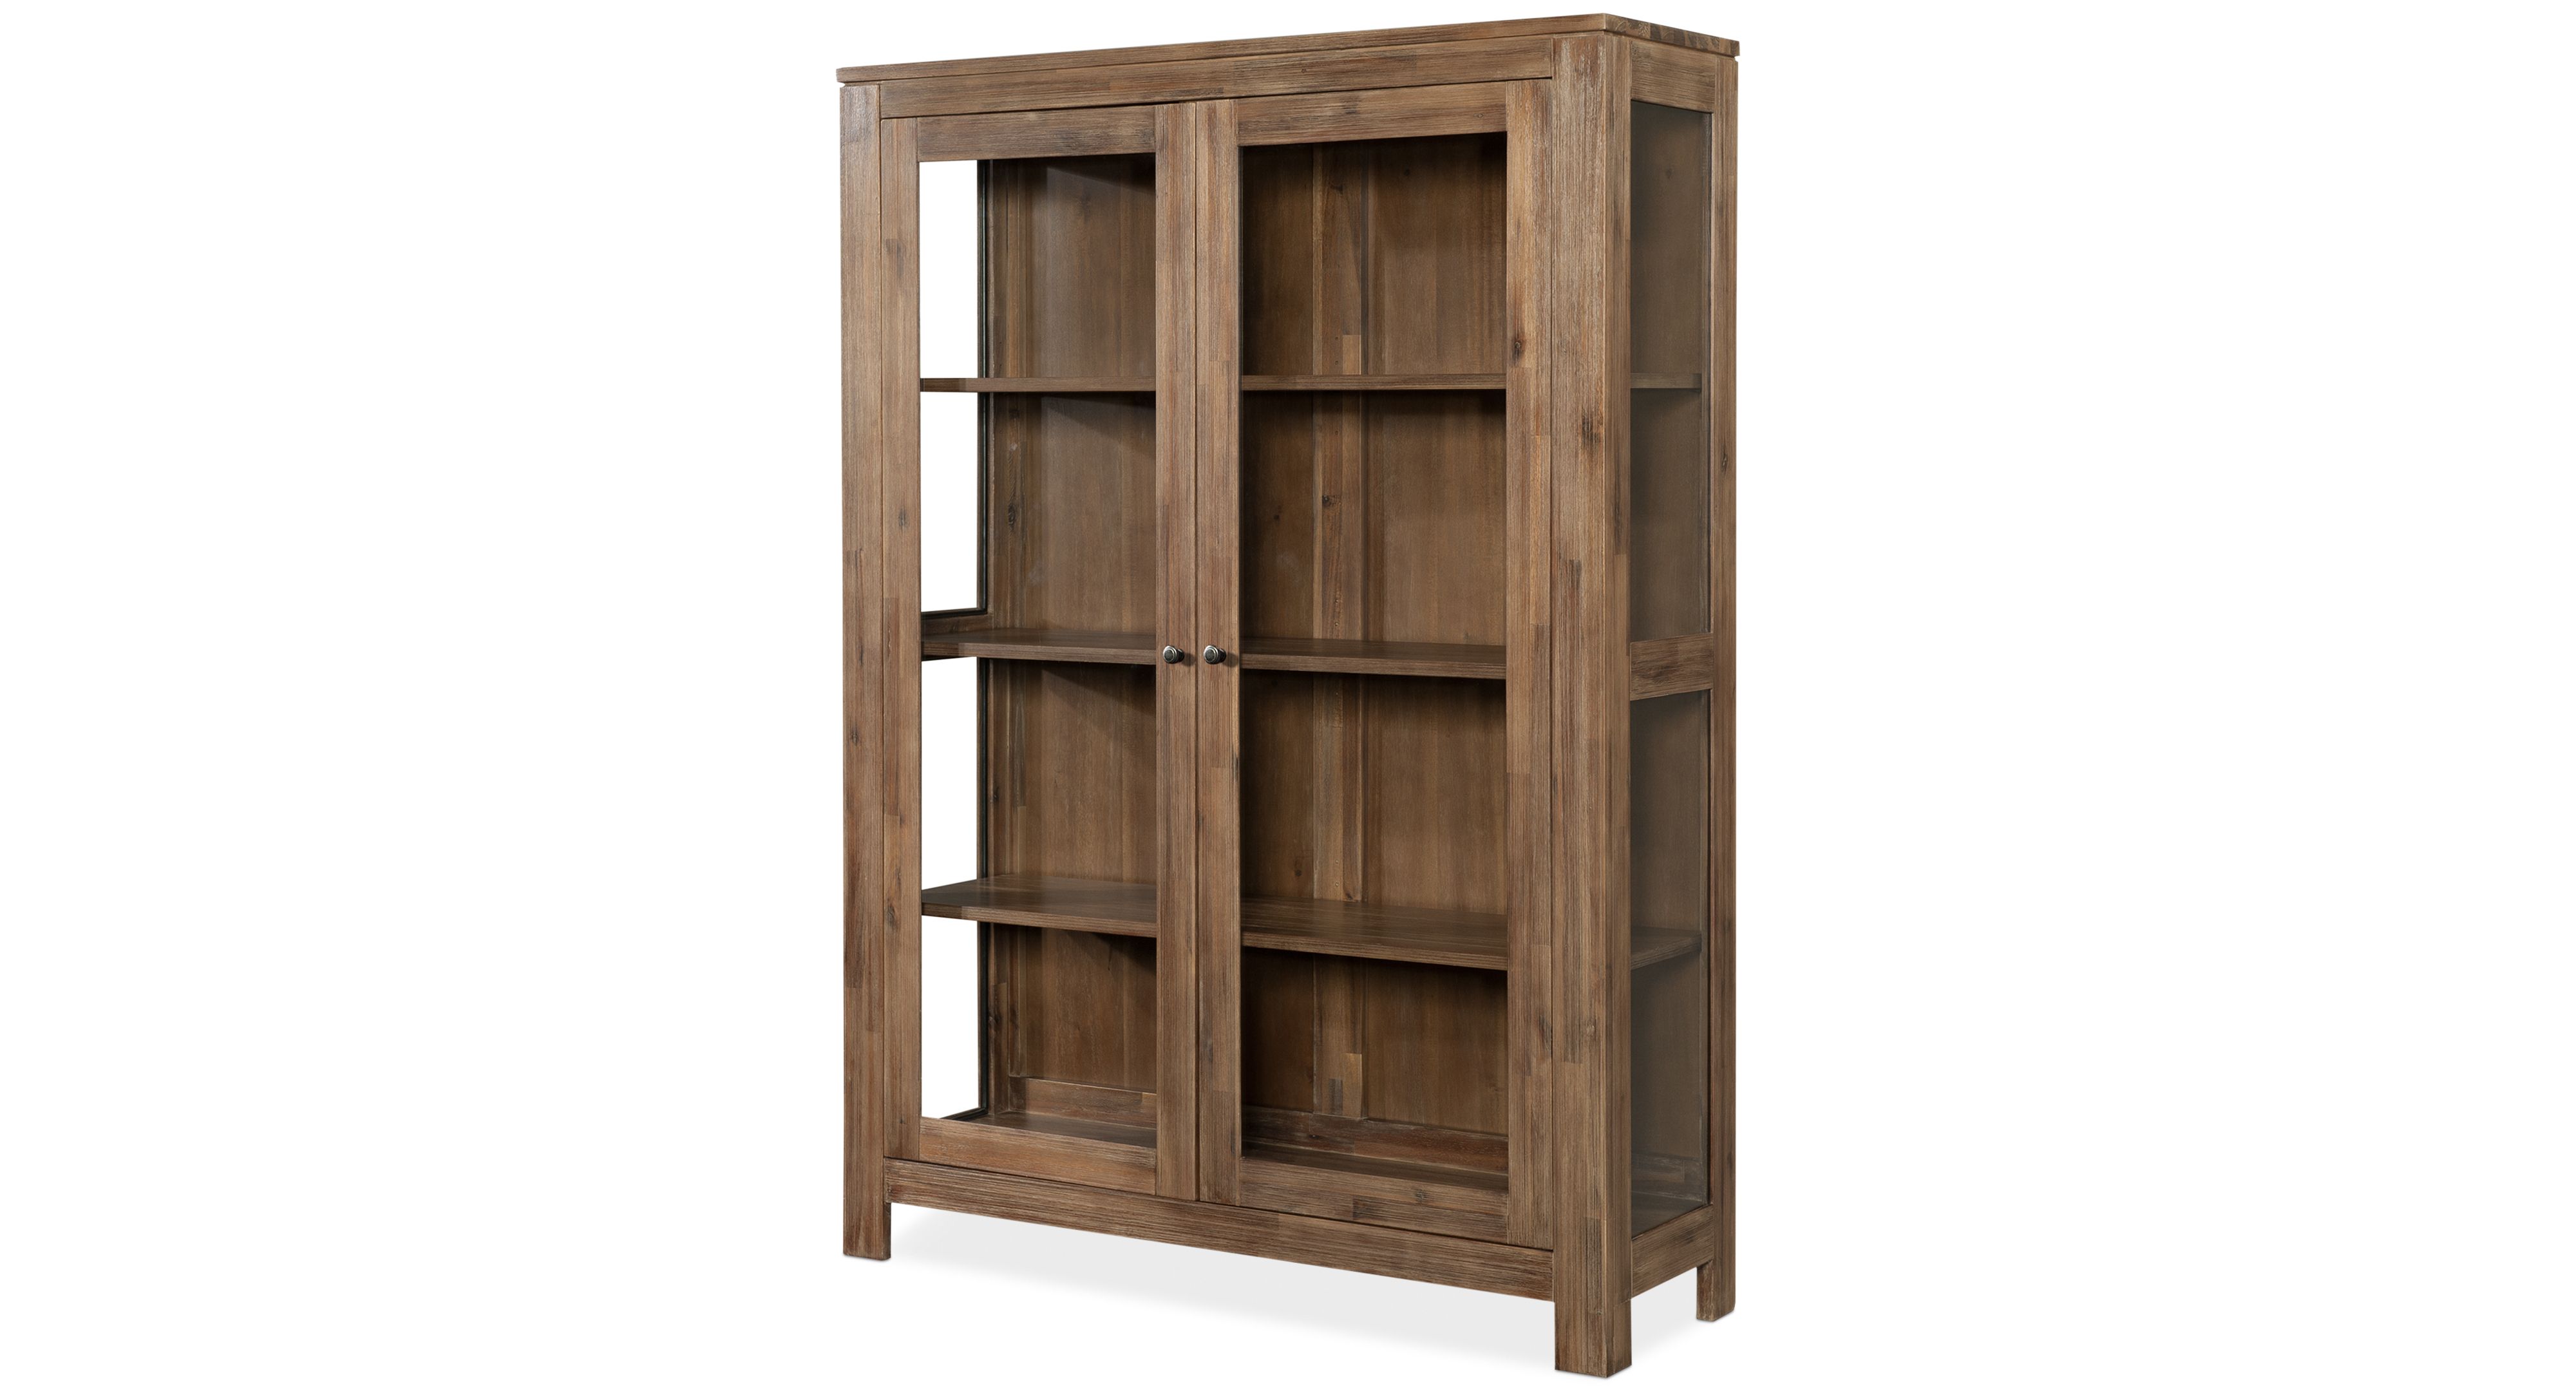 Cabinet Furniture Within Oridatown Standard Bookcases (View 17 of 20)